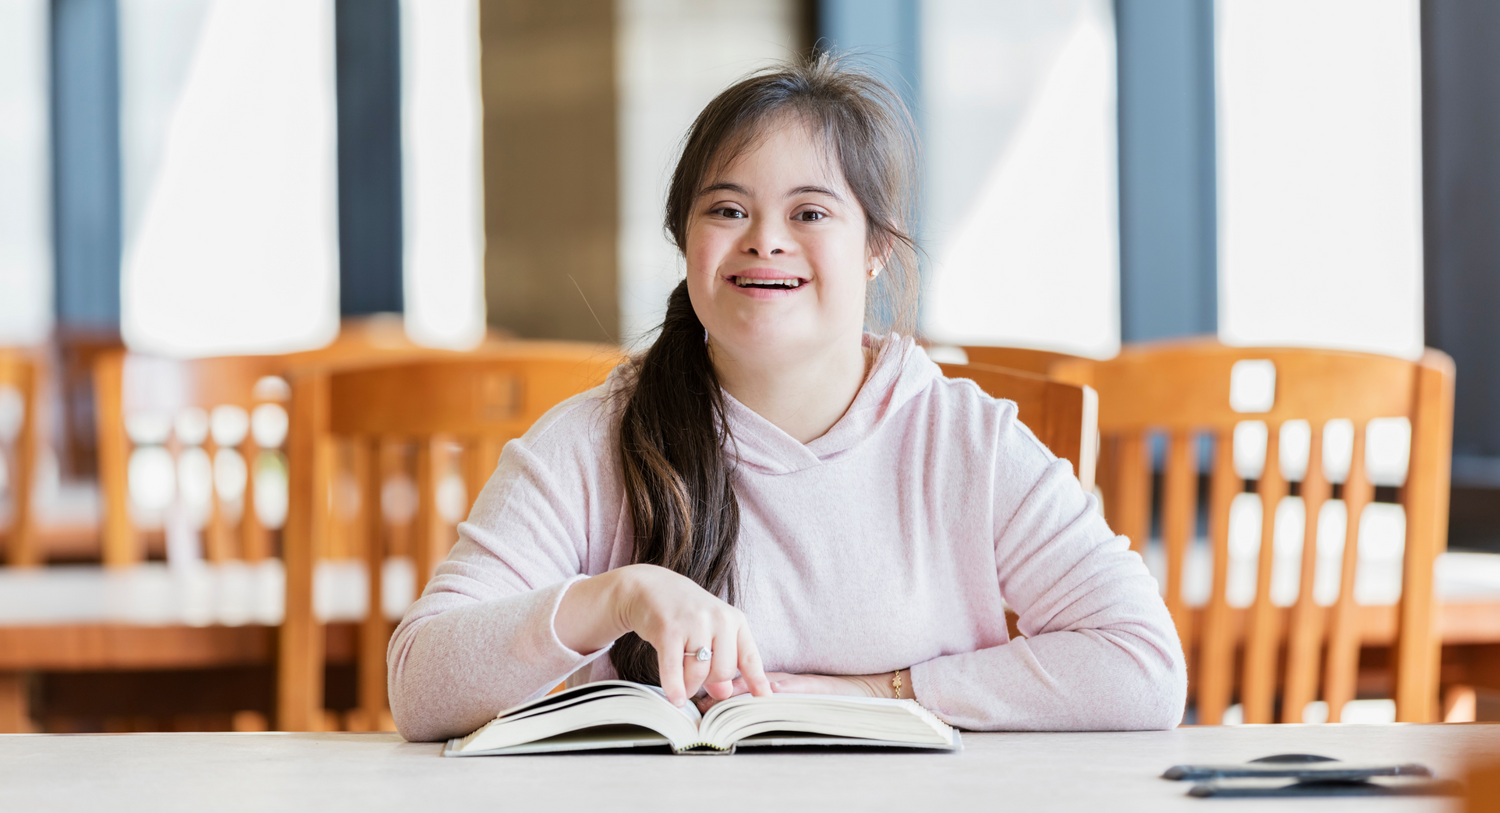 A young woman with intellectual disability smiling and reading an easy read page